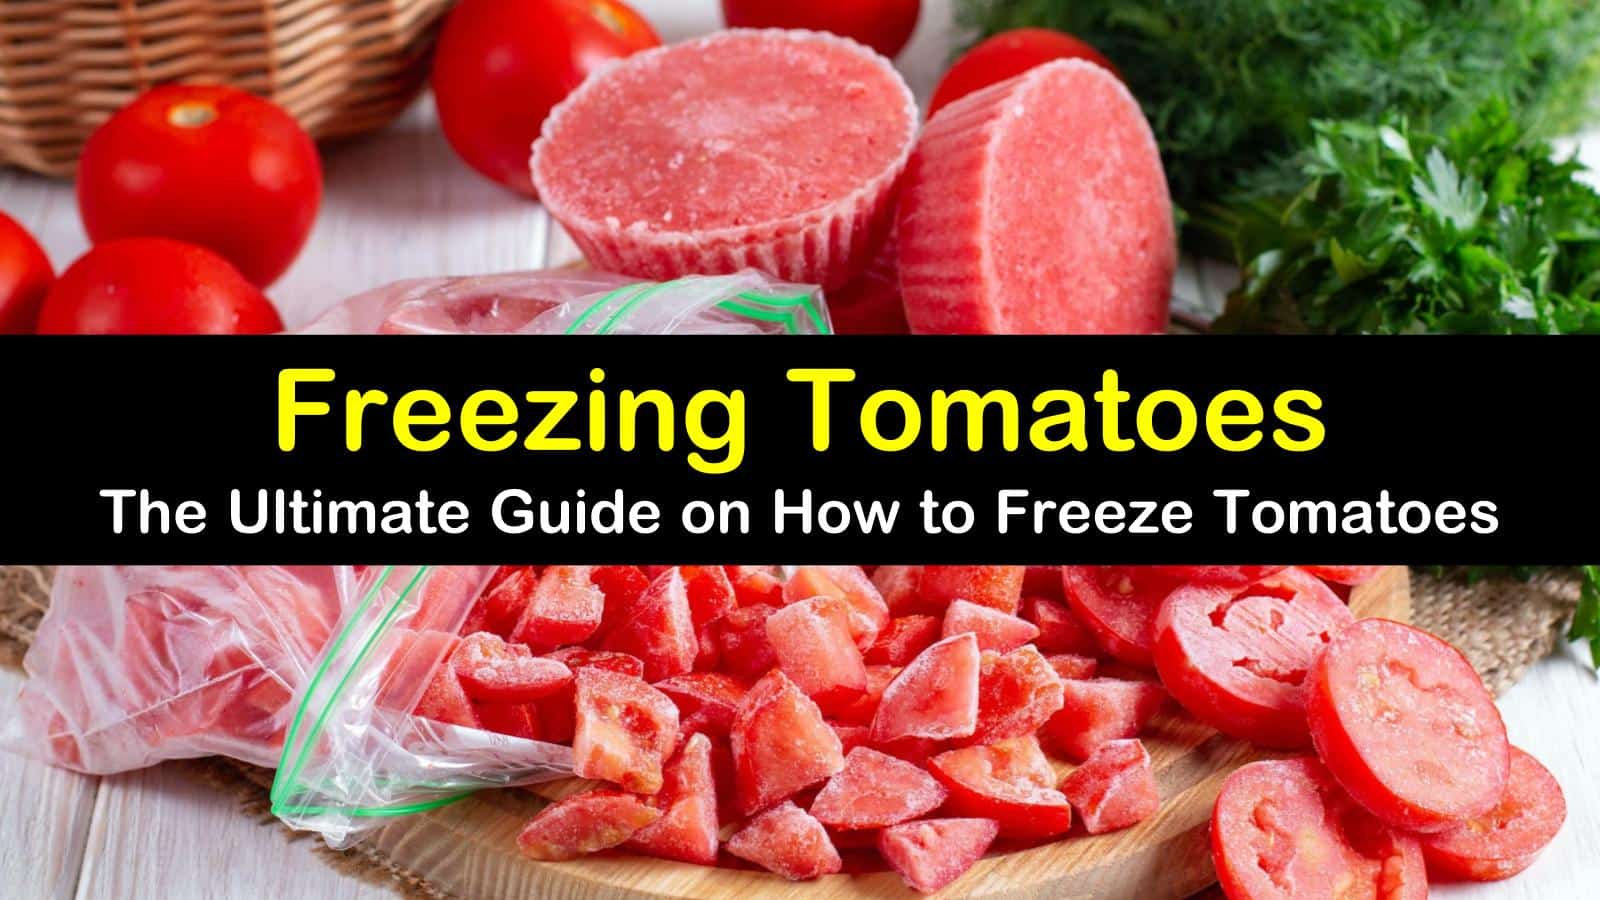 How To Freeze Tomatoes: The Go-To Guide to Freezing Your Tomato Harvest